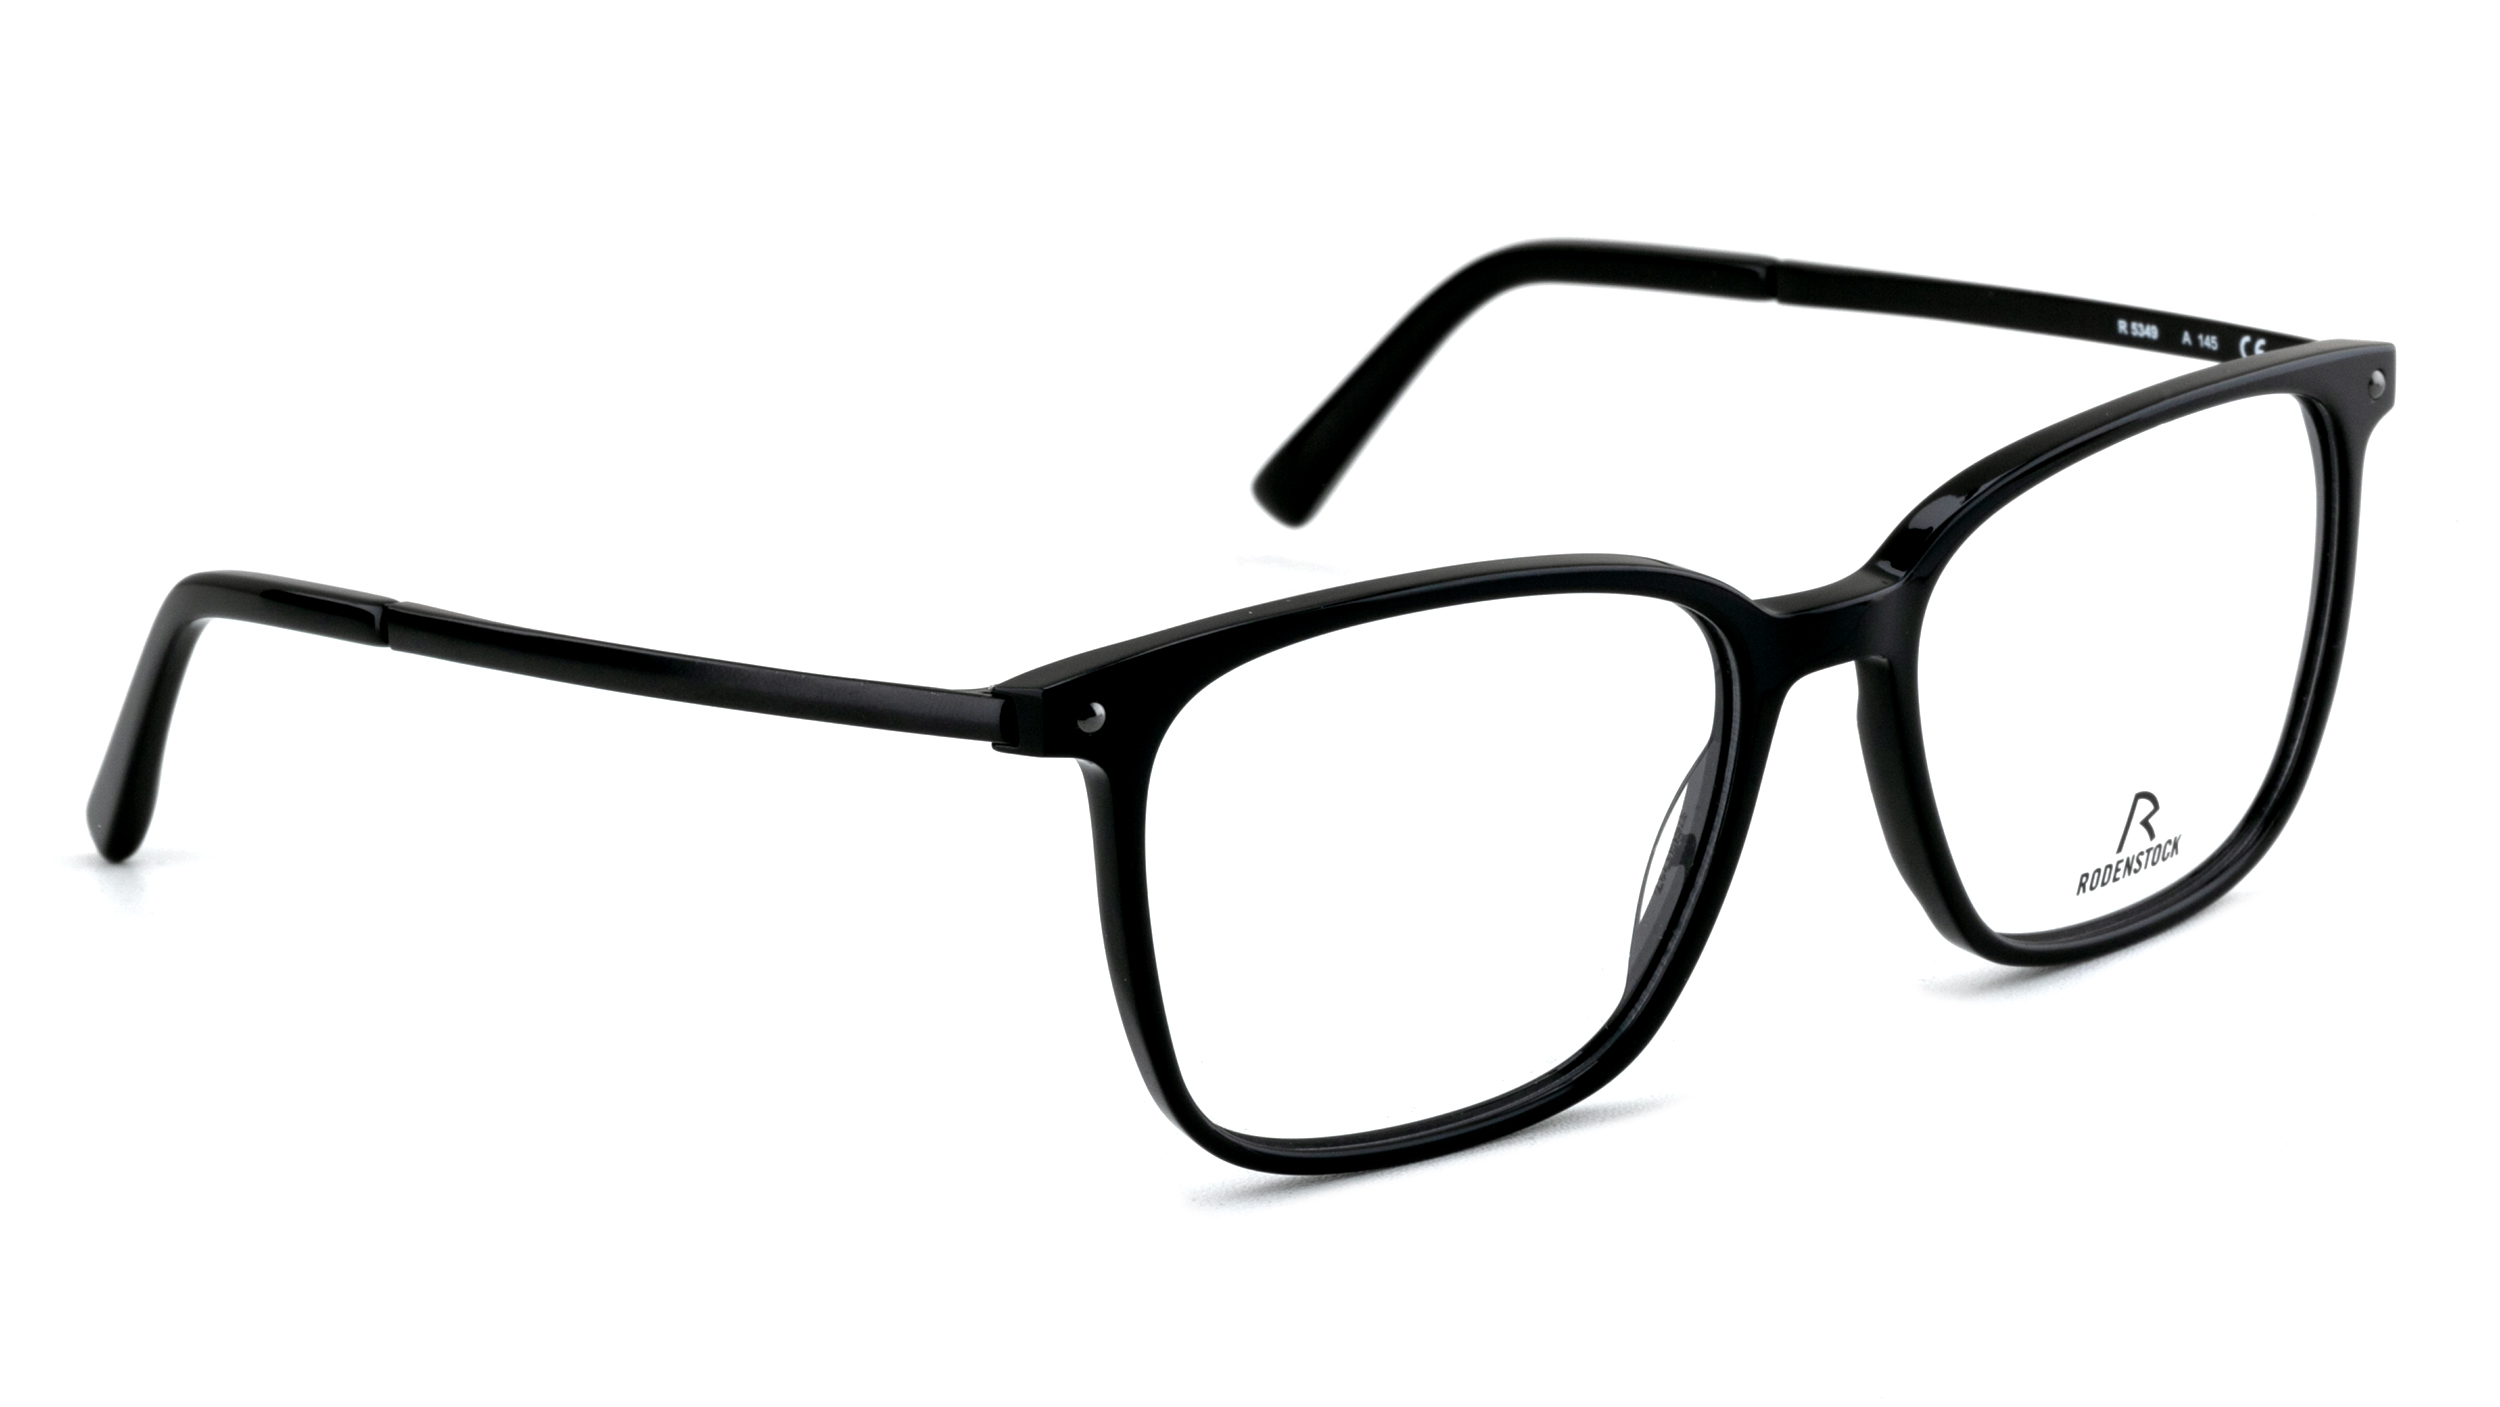   Rodenstock 5349-A 55 (+) - 2